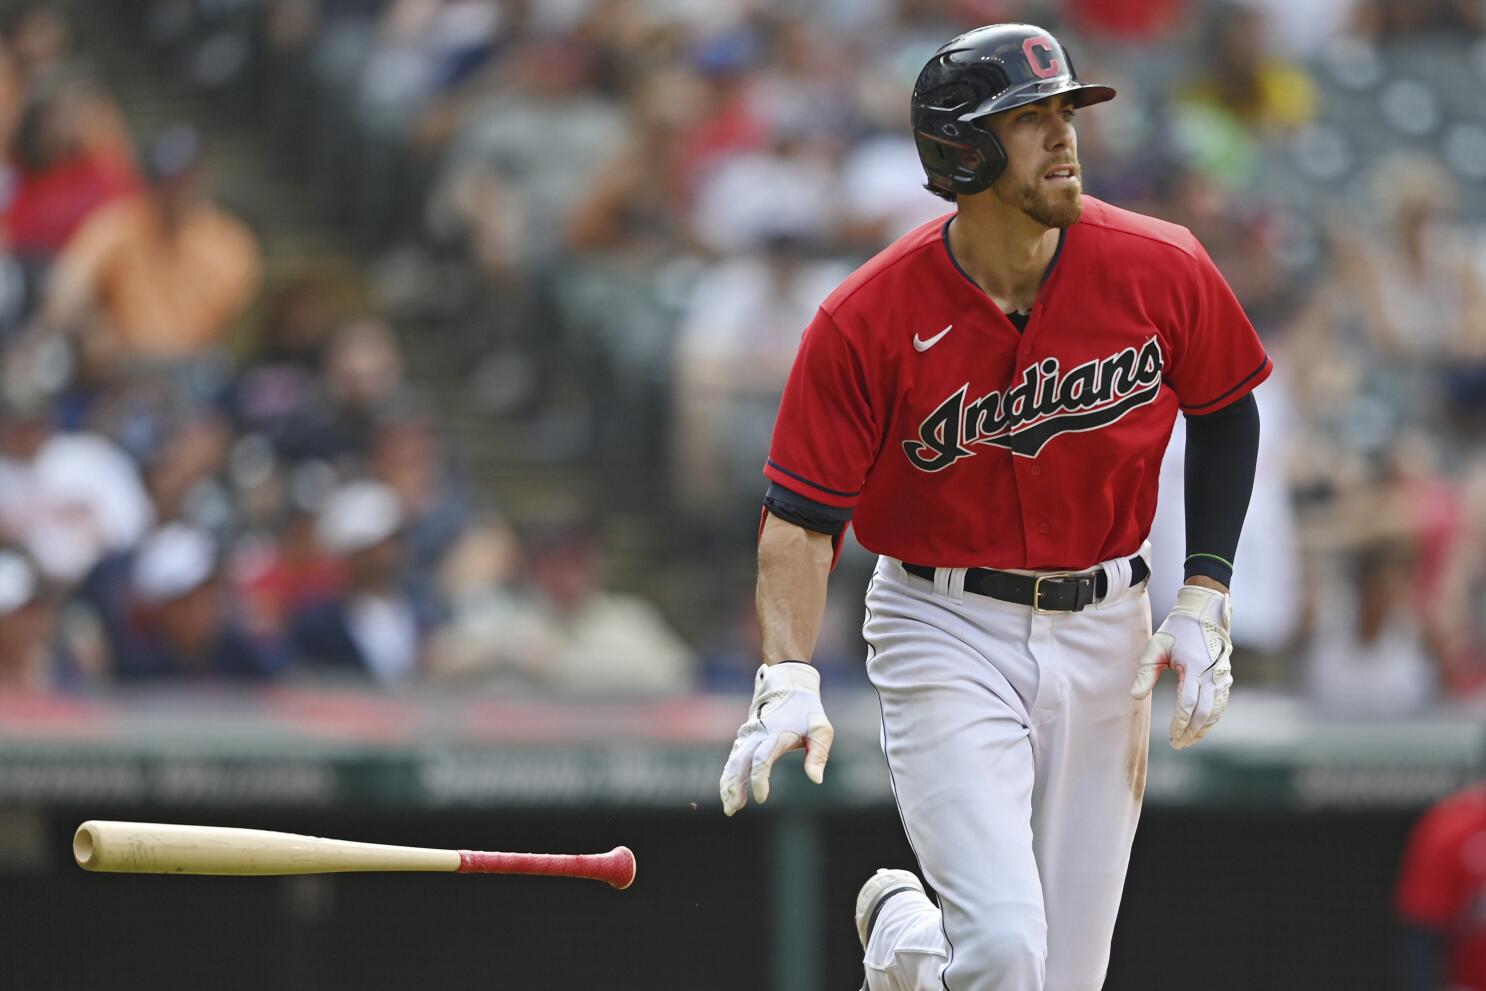 It's mid-August and the Cleveland Indians are down to one job